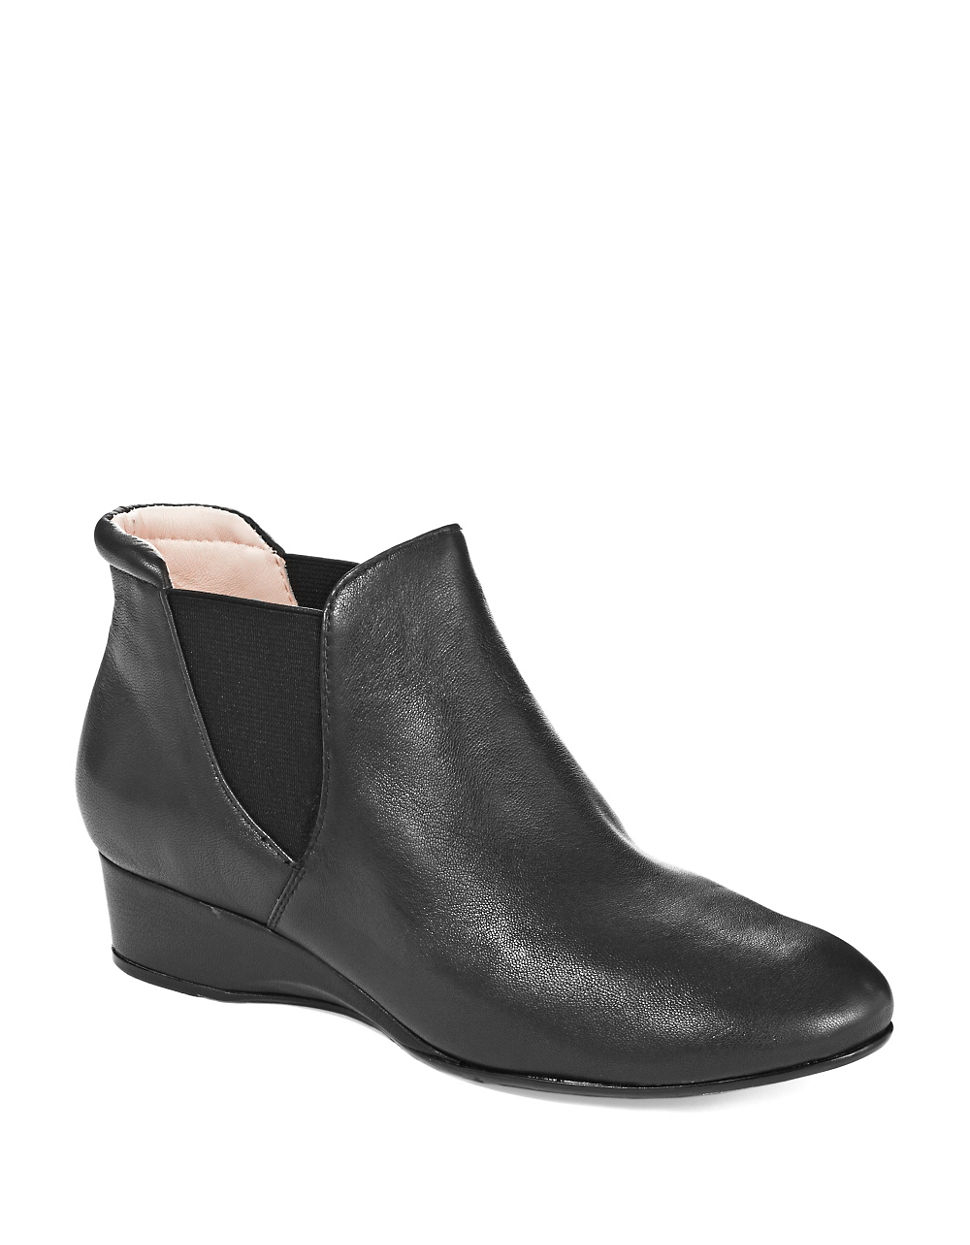 Taryn Rose Franklyn Ankle Boots in Black | Lyst